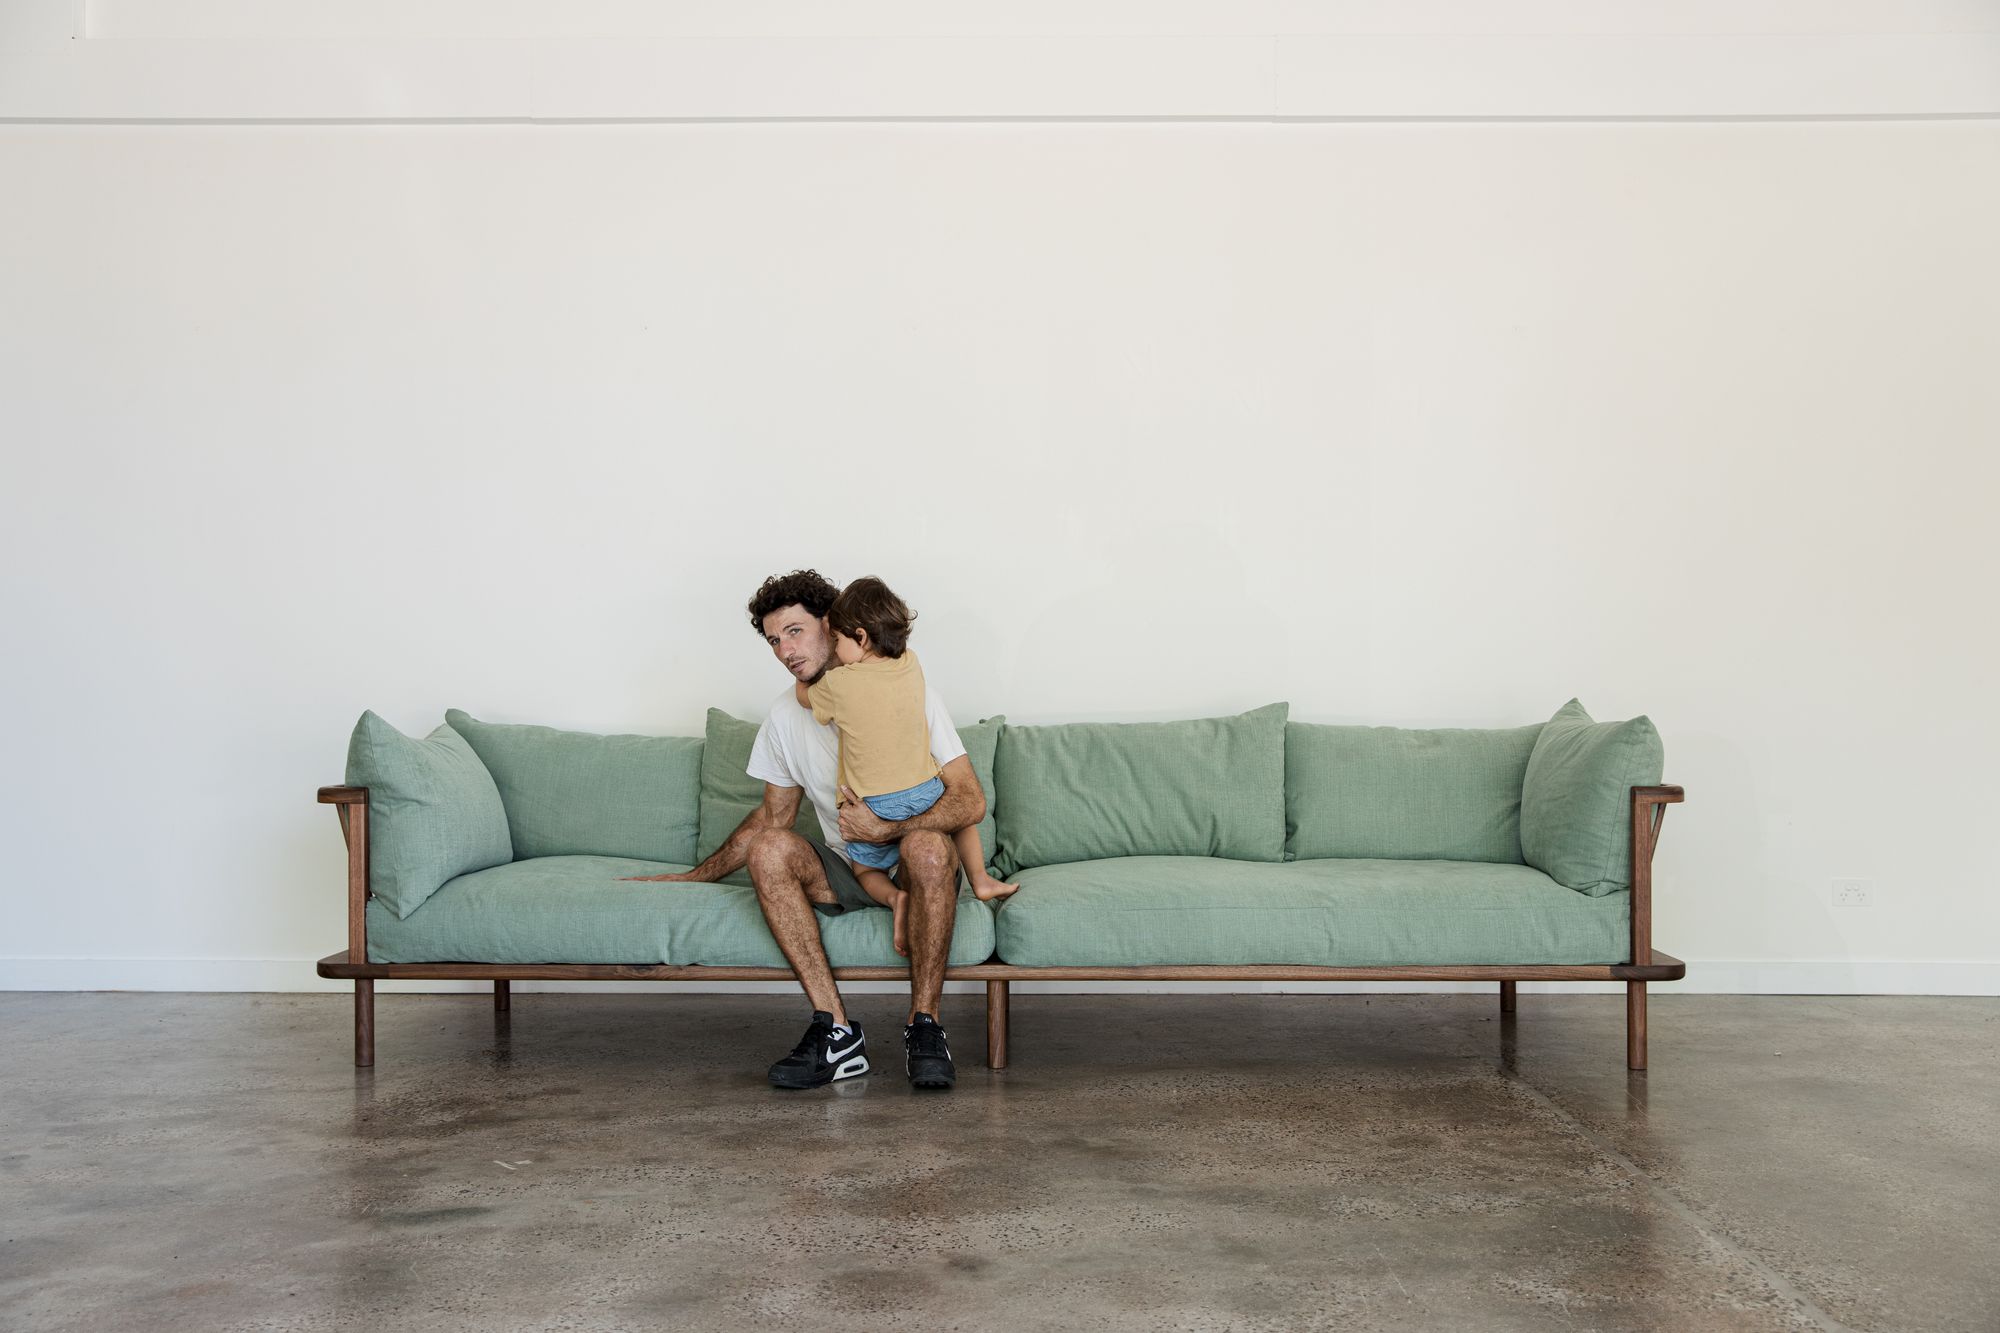  J.D Lee Furniture. A spacious room with a minimalist design, featuring a wooden-framed couch adorned with soft, forest green cushions. Seated on the couch is a jeremy founder of JD.lee  in a white shirt, hugging his  child in a mustard-colored top.  The polished concrete floor reflects natural light, complementing the muted palette of the room and emphasizing the simplicity and coziness of the setting.